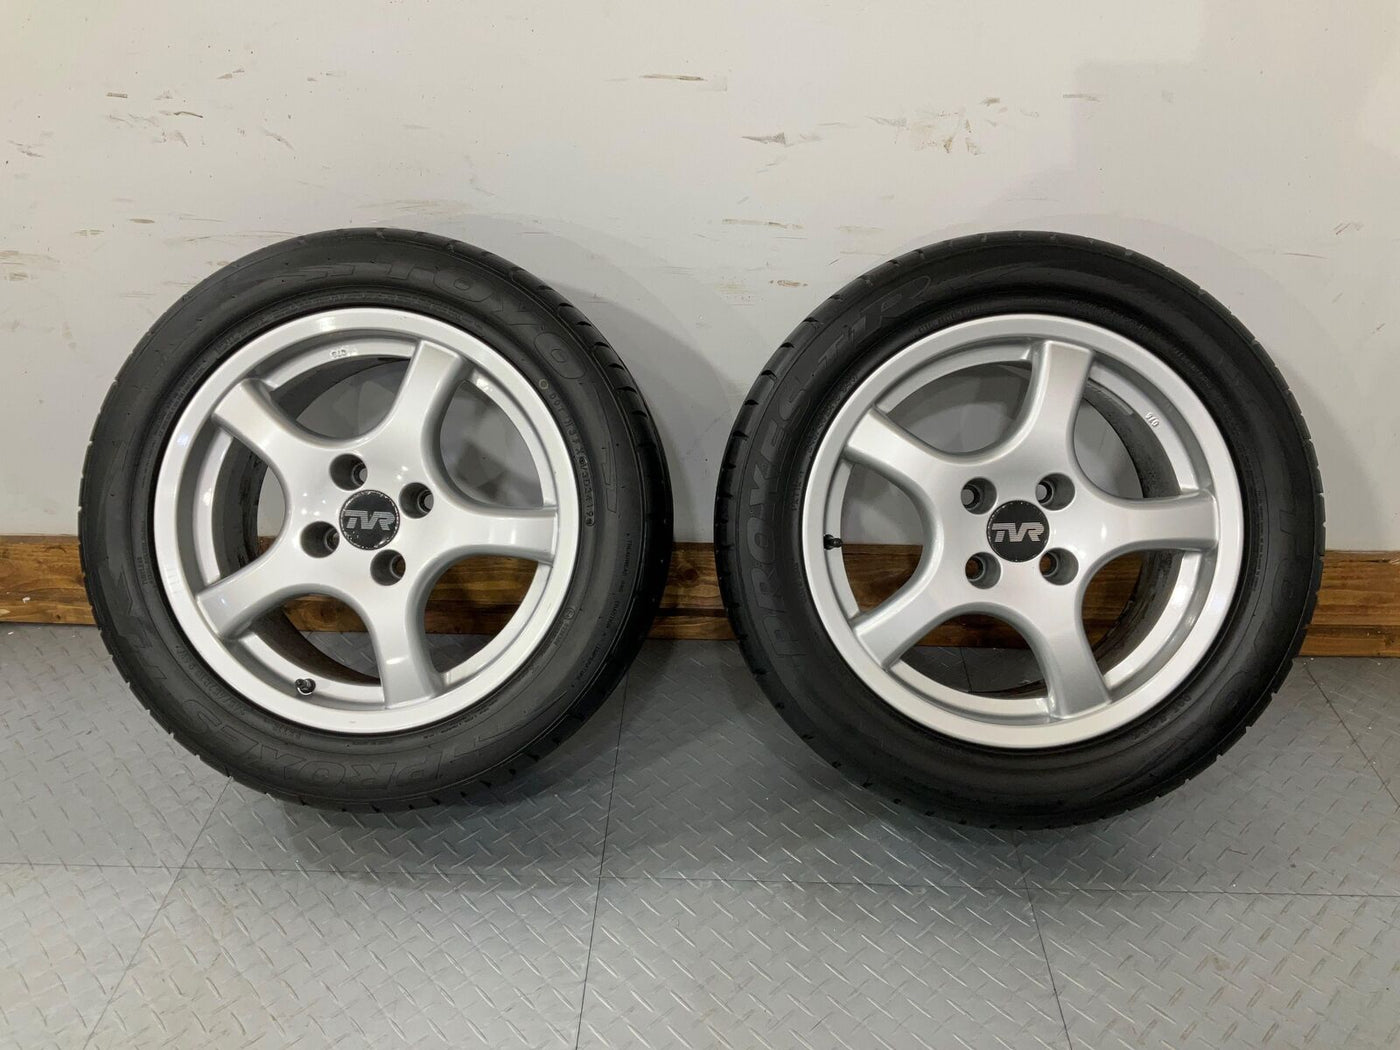 TVR Chimaera Set of 4 15x7 & 16x7.5 Staggered Wheels W/Toyo Tires 1 Rear Is Bent